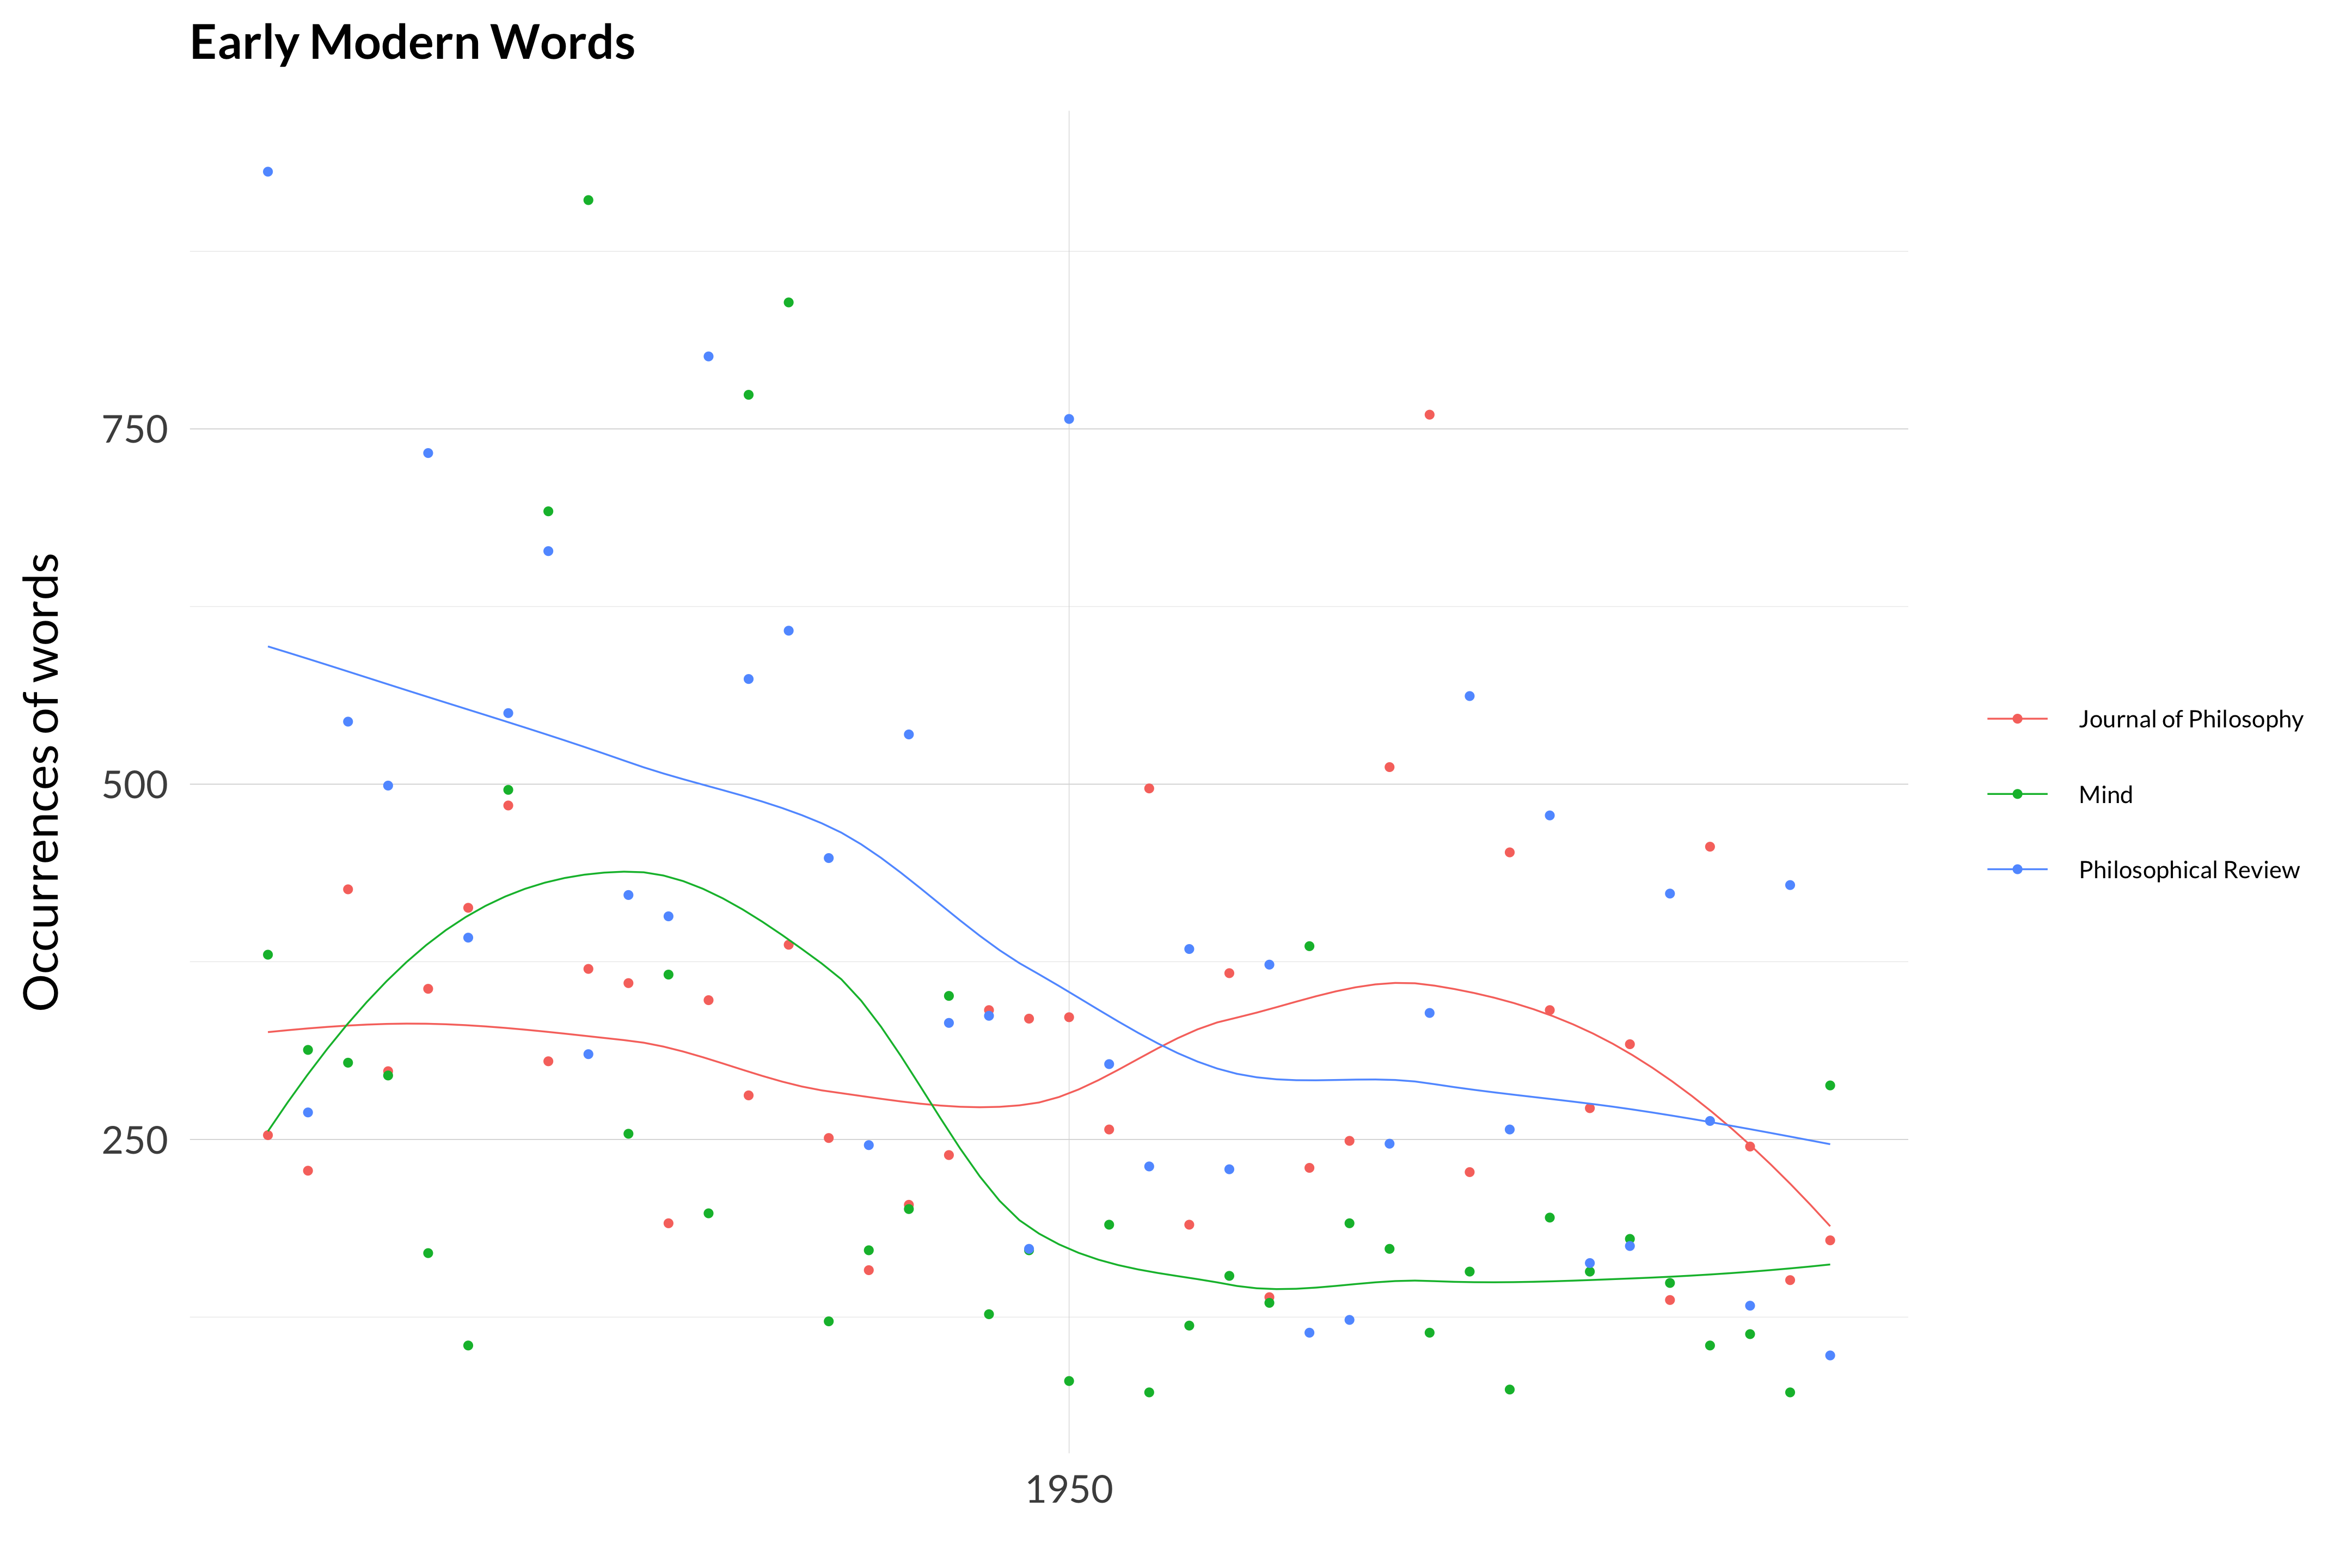 A single scatterplot showing the sum of the previous 12. The fall in how often these words appear in Mind is very dramatic, from averaging about 400 appearances per year to about 150.